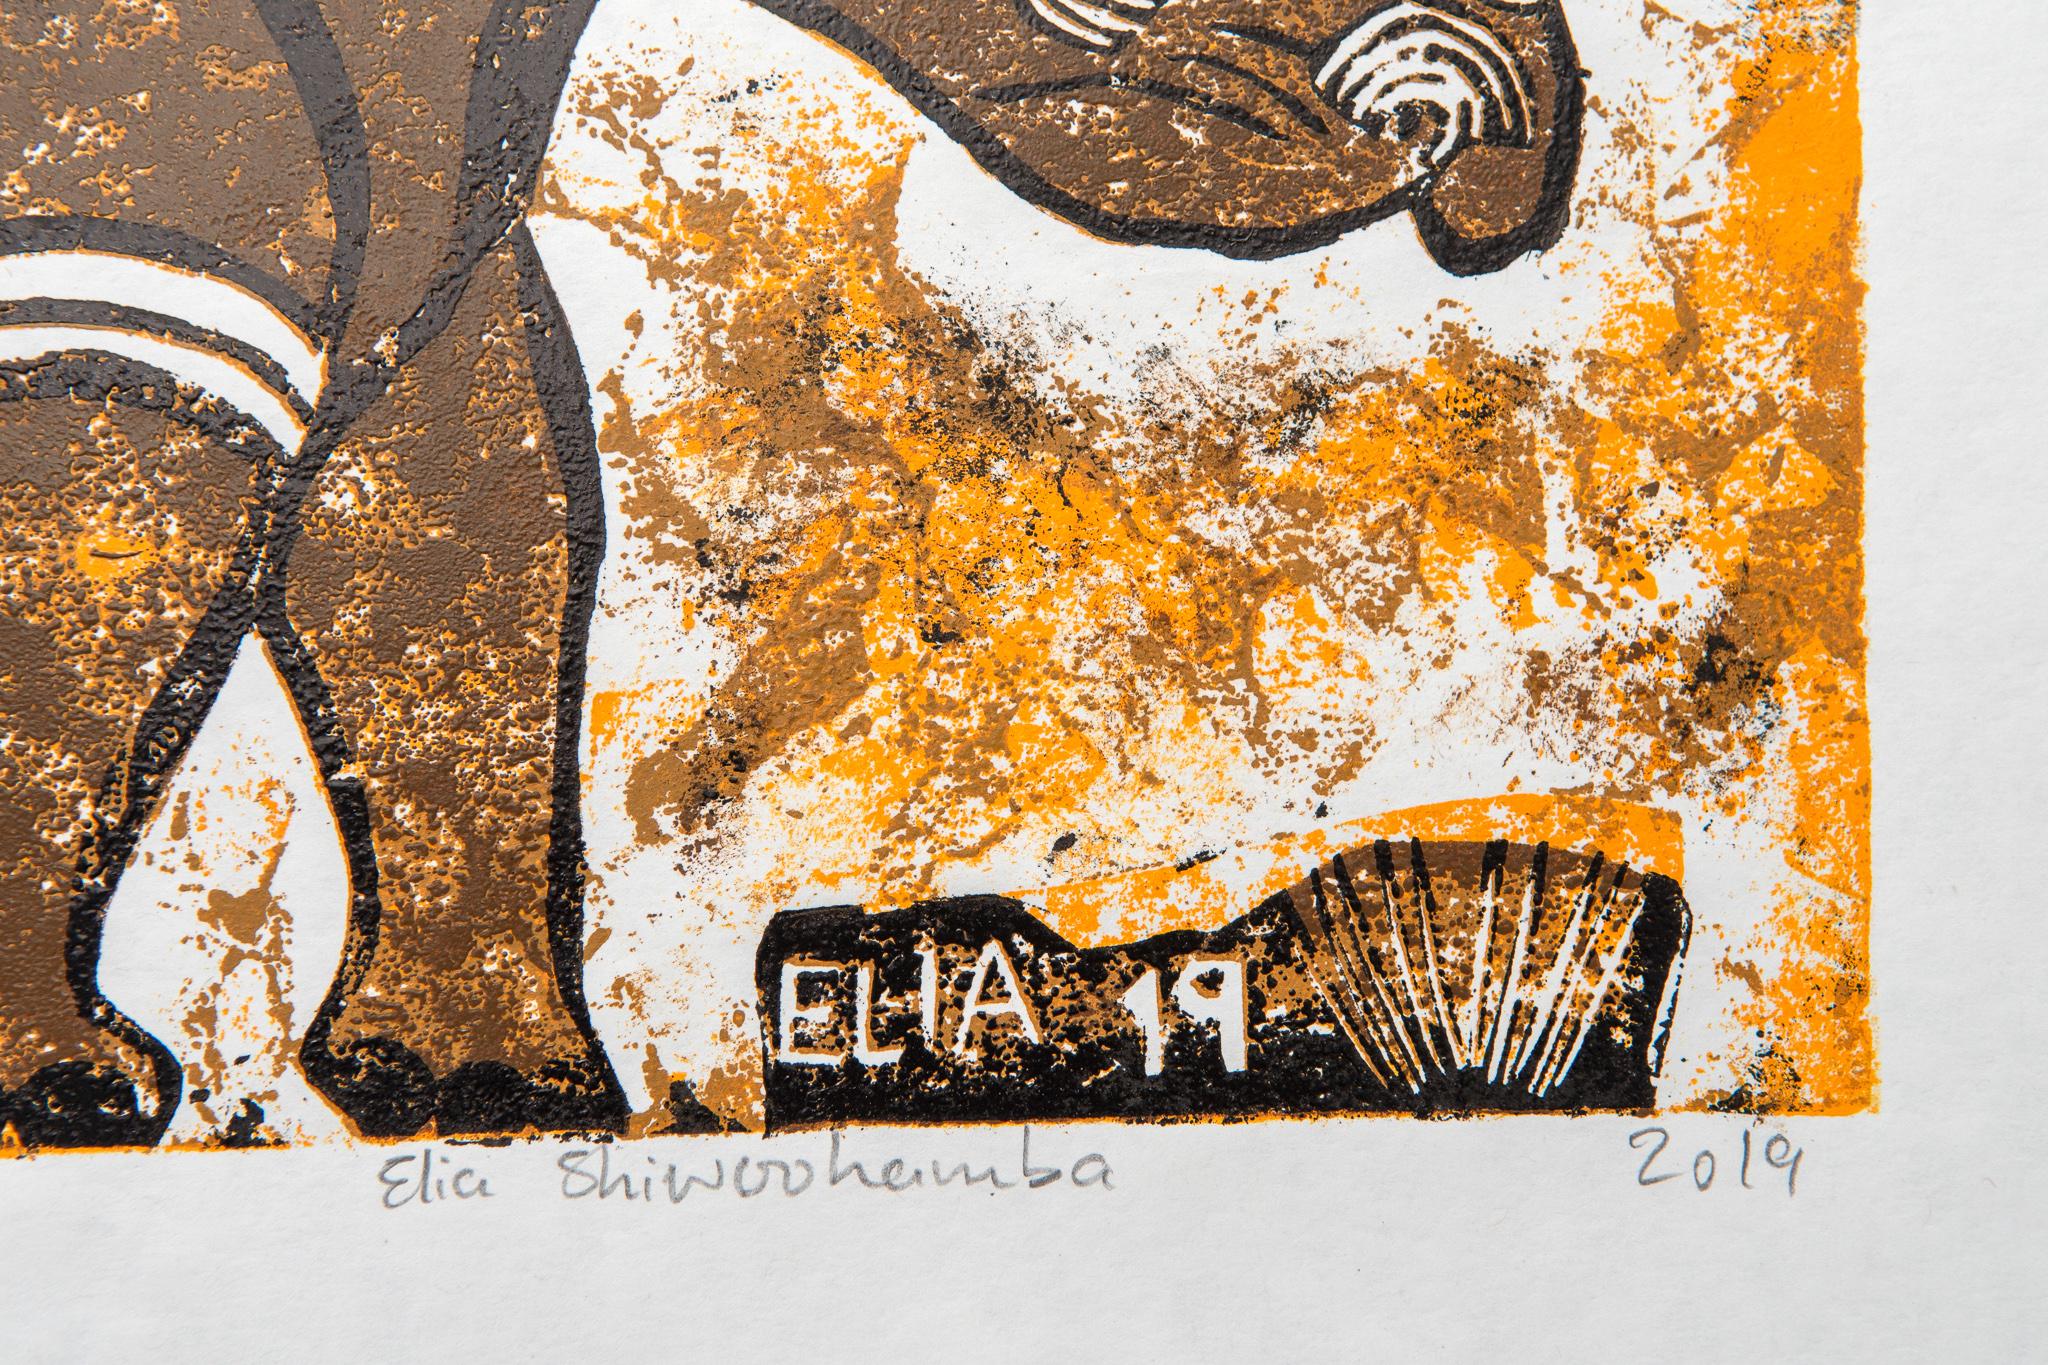 God help the Rhinos of Namibia, 2019. Cardboard print on paper. Edition of 10.

Elia Shiwoohamba was born in 1981 in Windhoek, Namibia. He graduated from the John Muafangejo Art Centre in Windhoek in 2006. Specialising in printmaking and sculpture,